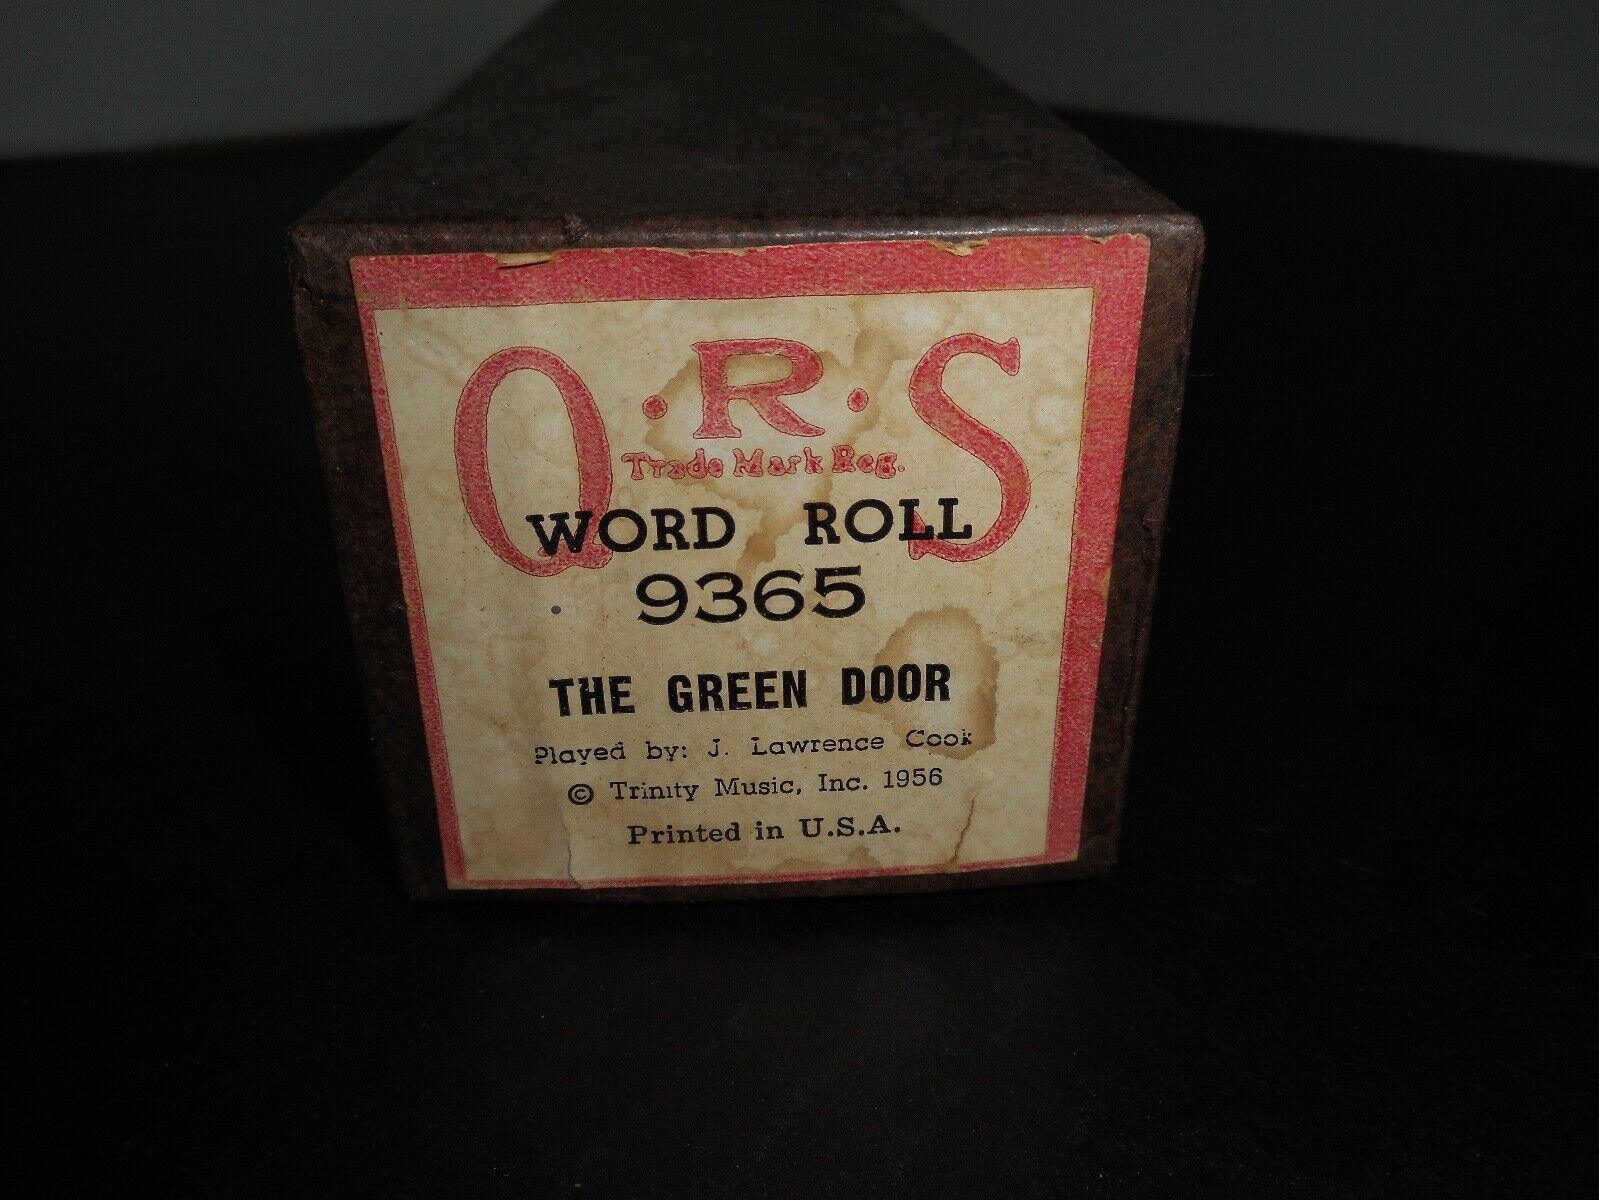 The Green Door - Qrs Piano Roll 9365 - P/b J. Lawrence Cook